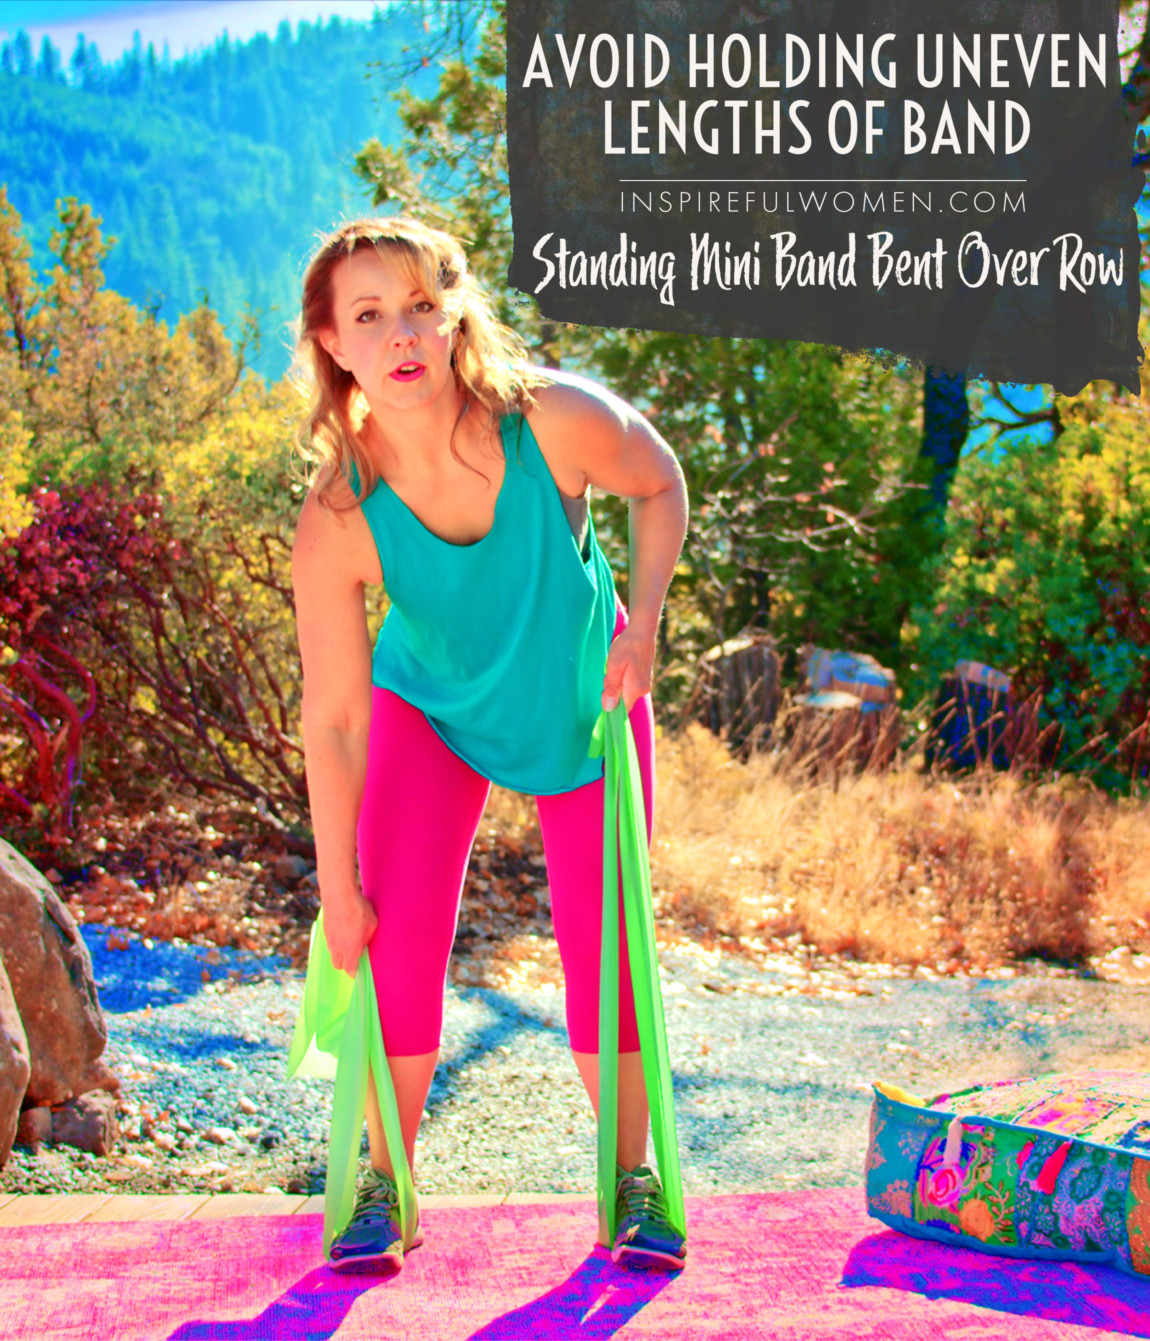 avoid-holding-uneven-lengths-of-band-two-arm-mini-band-bent-over-row